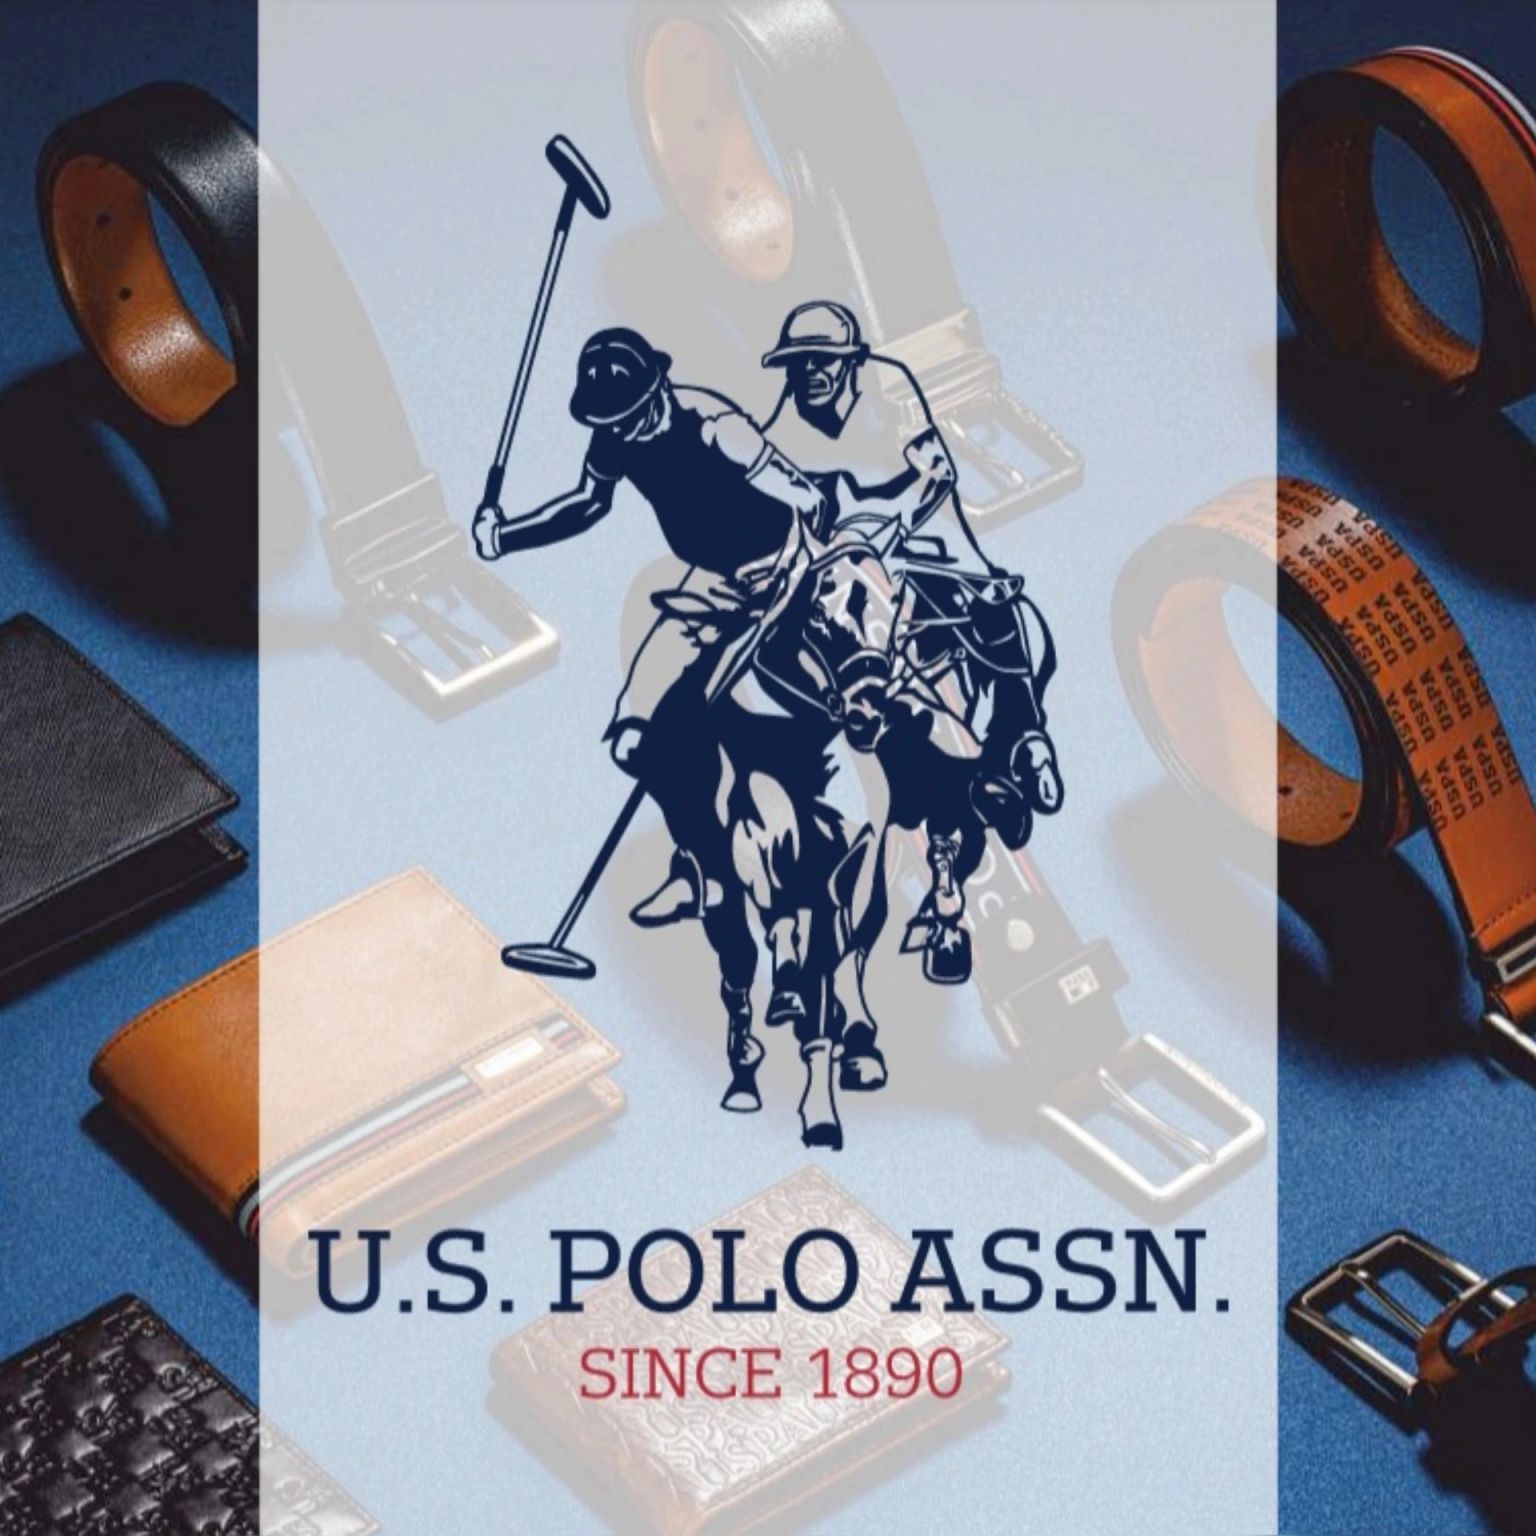 Fashion Network: U.S. Polo Assn. expands in Brazil with Alpar do